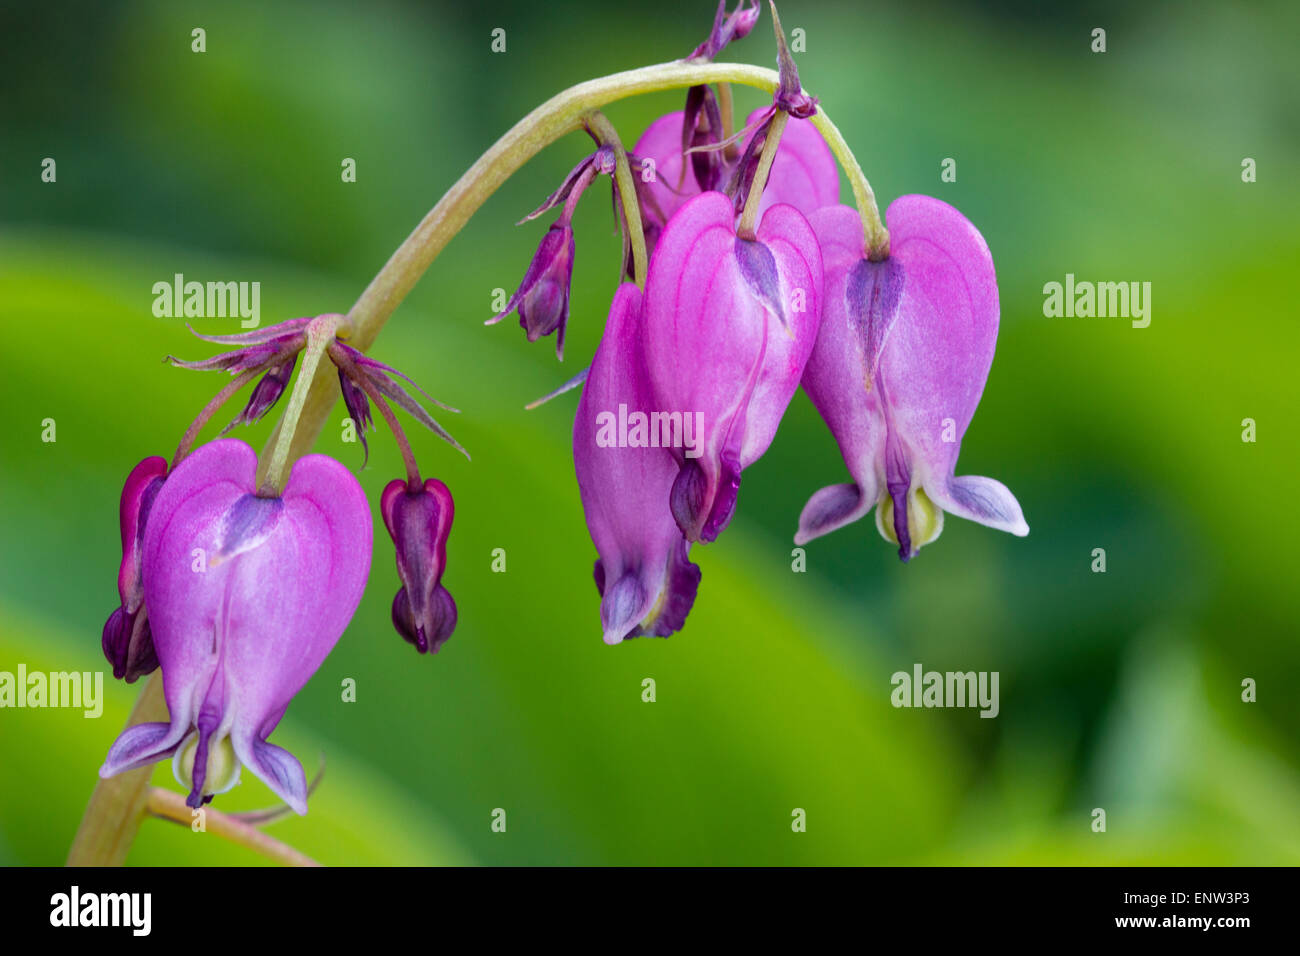 Bleeding heart flowers of the ferny leaved woodlander, Dicentra formosa Stock Photo